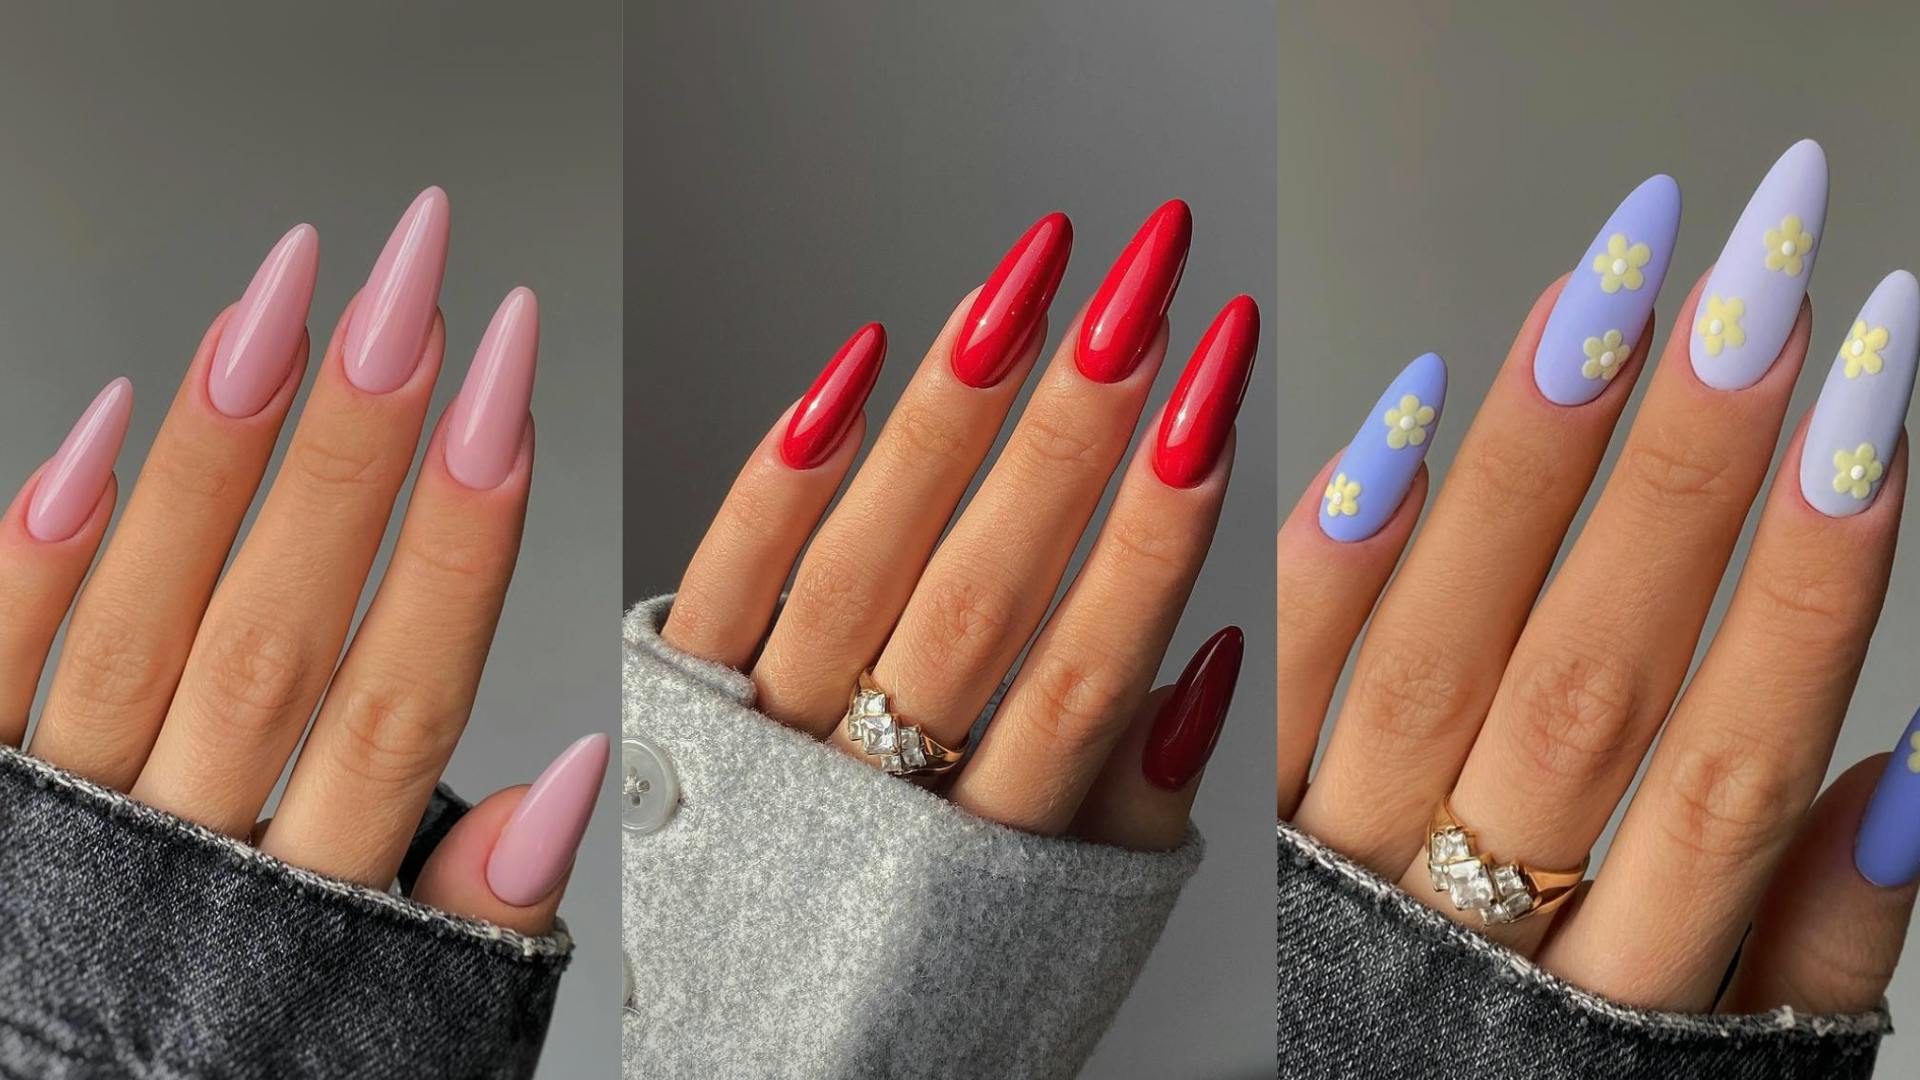 Acrylic Nails vs Gel Nails: Which is Best for You? – Glitterbels